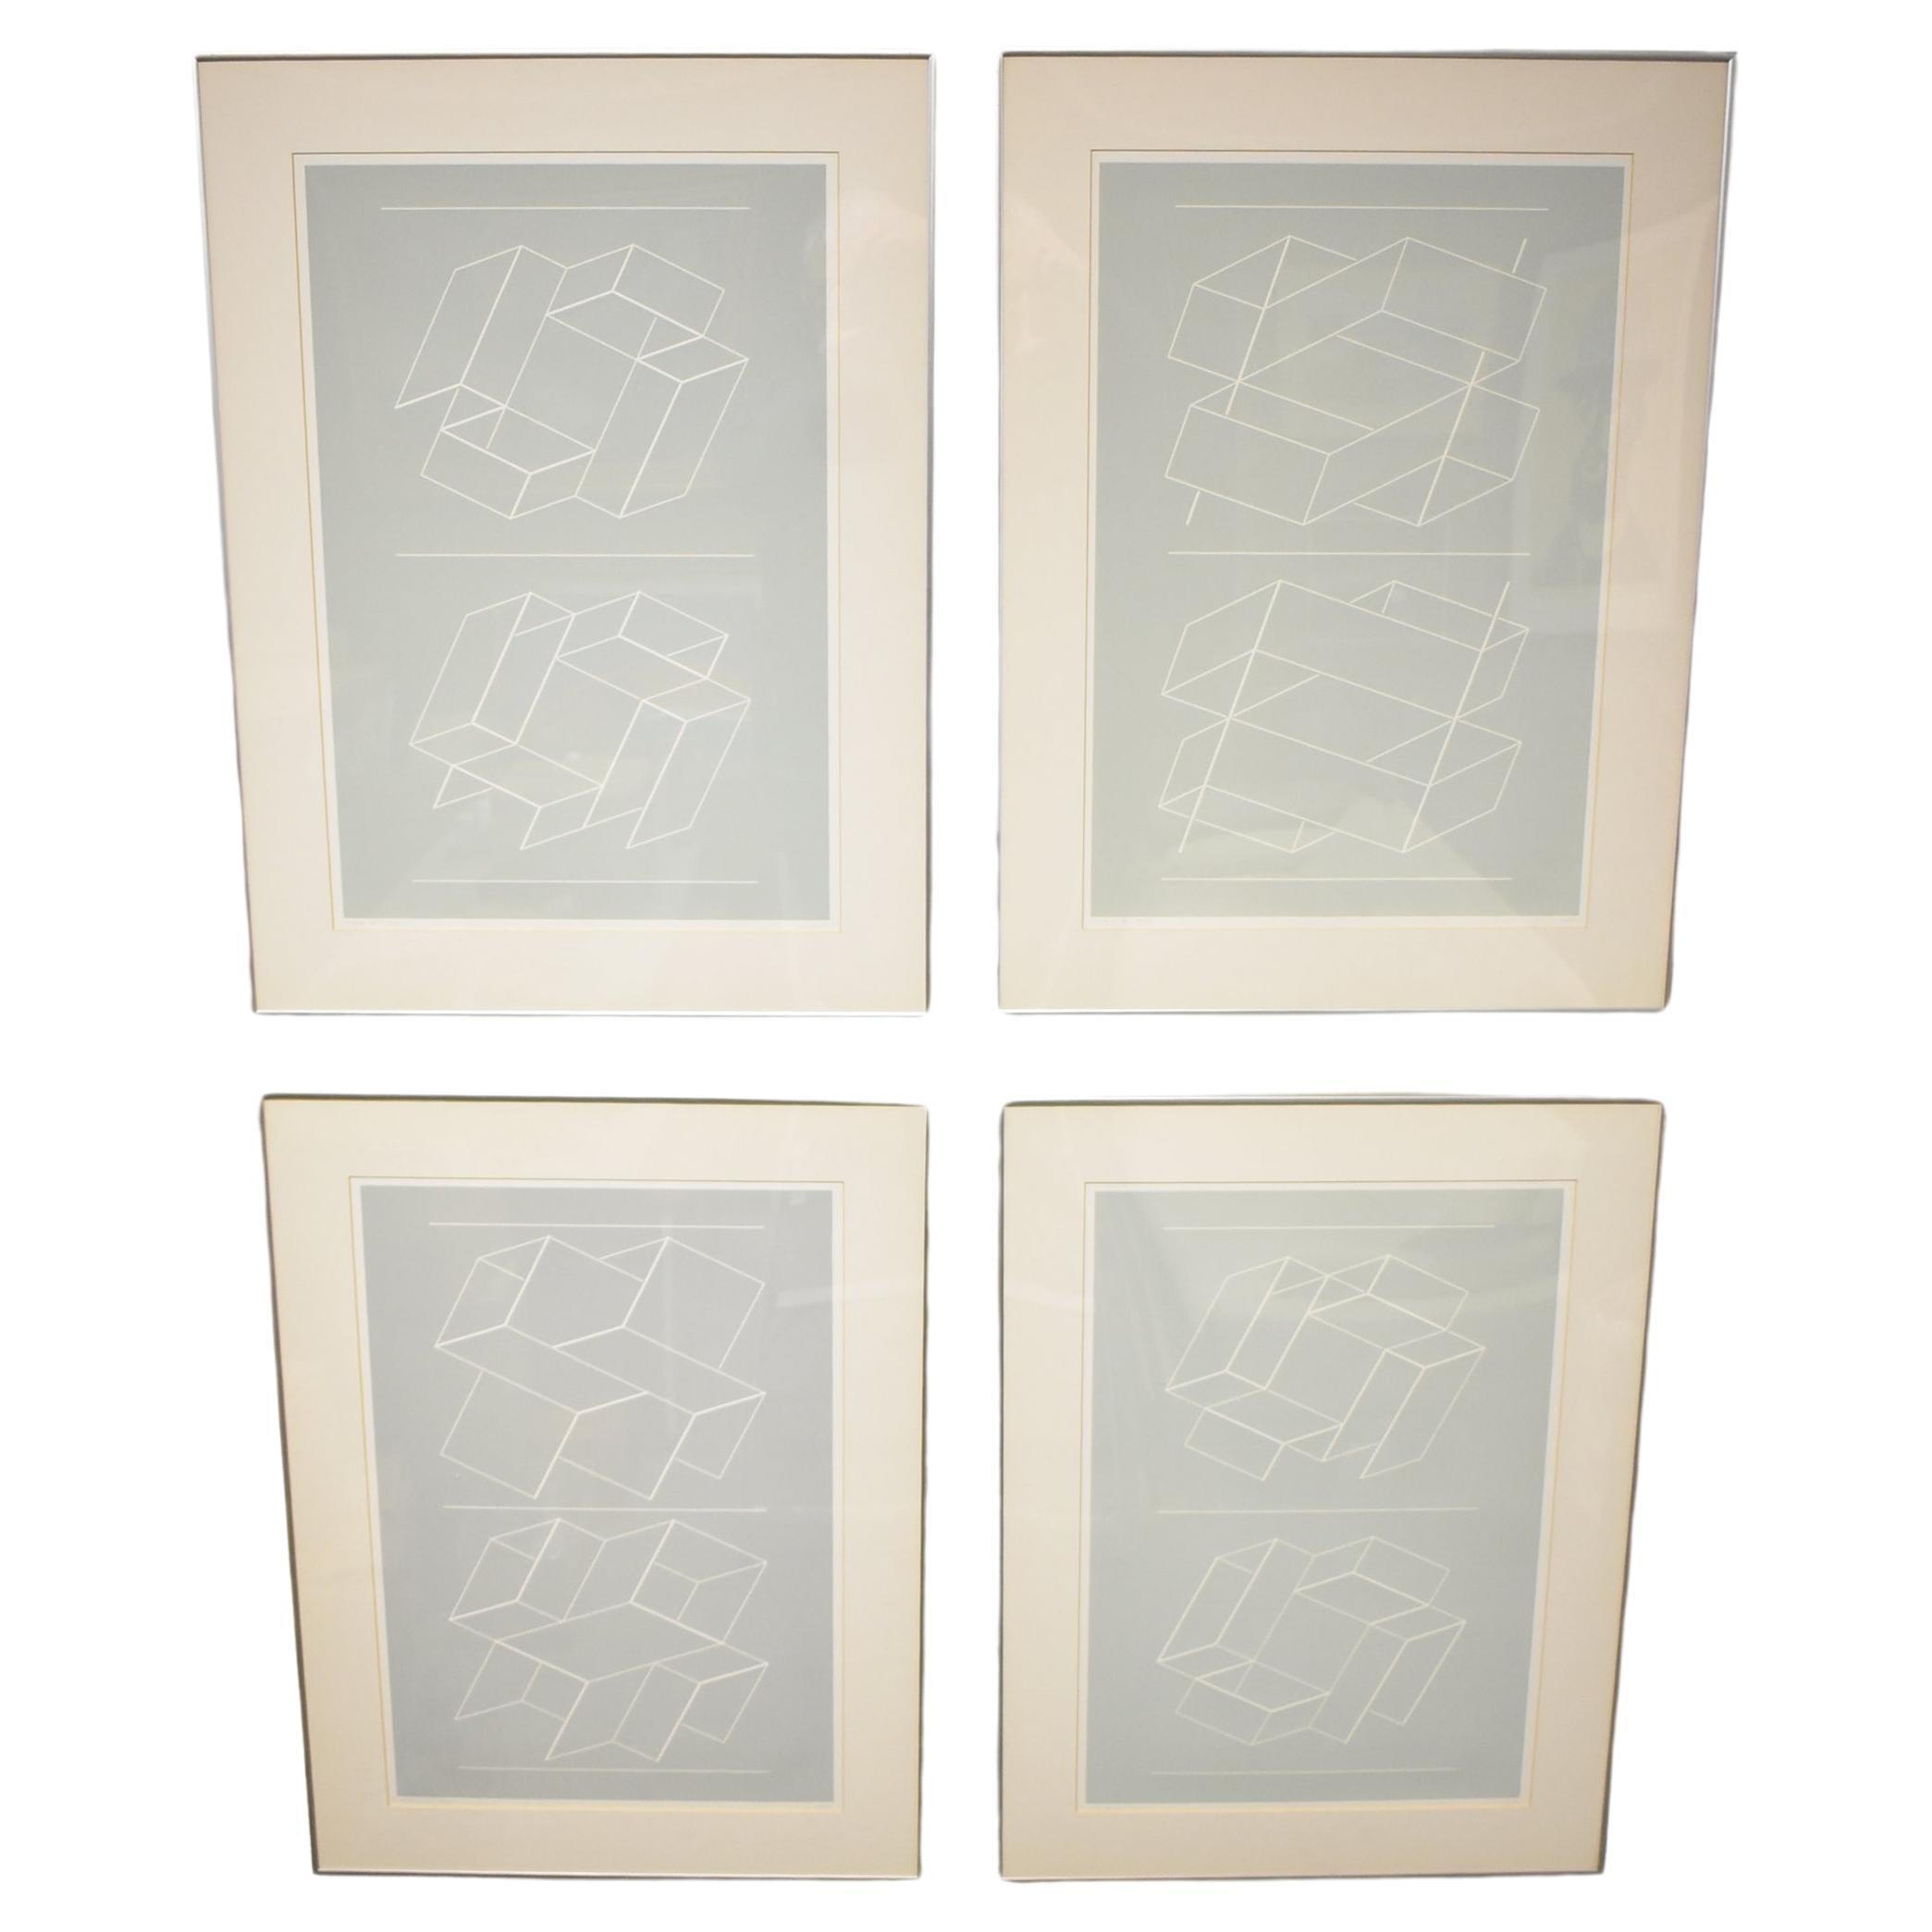 "White Embossings on Gray" Prints by Josef Albers For Sale